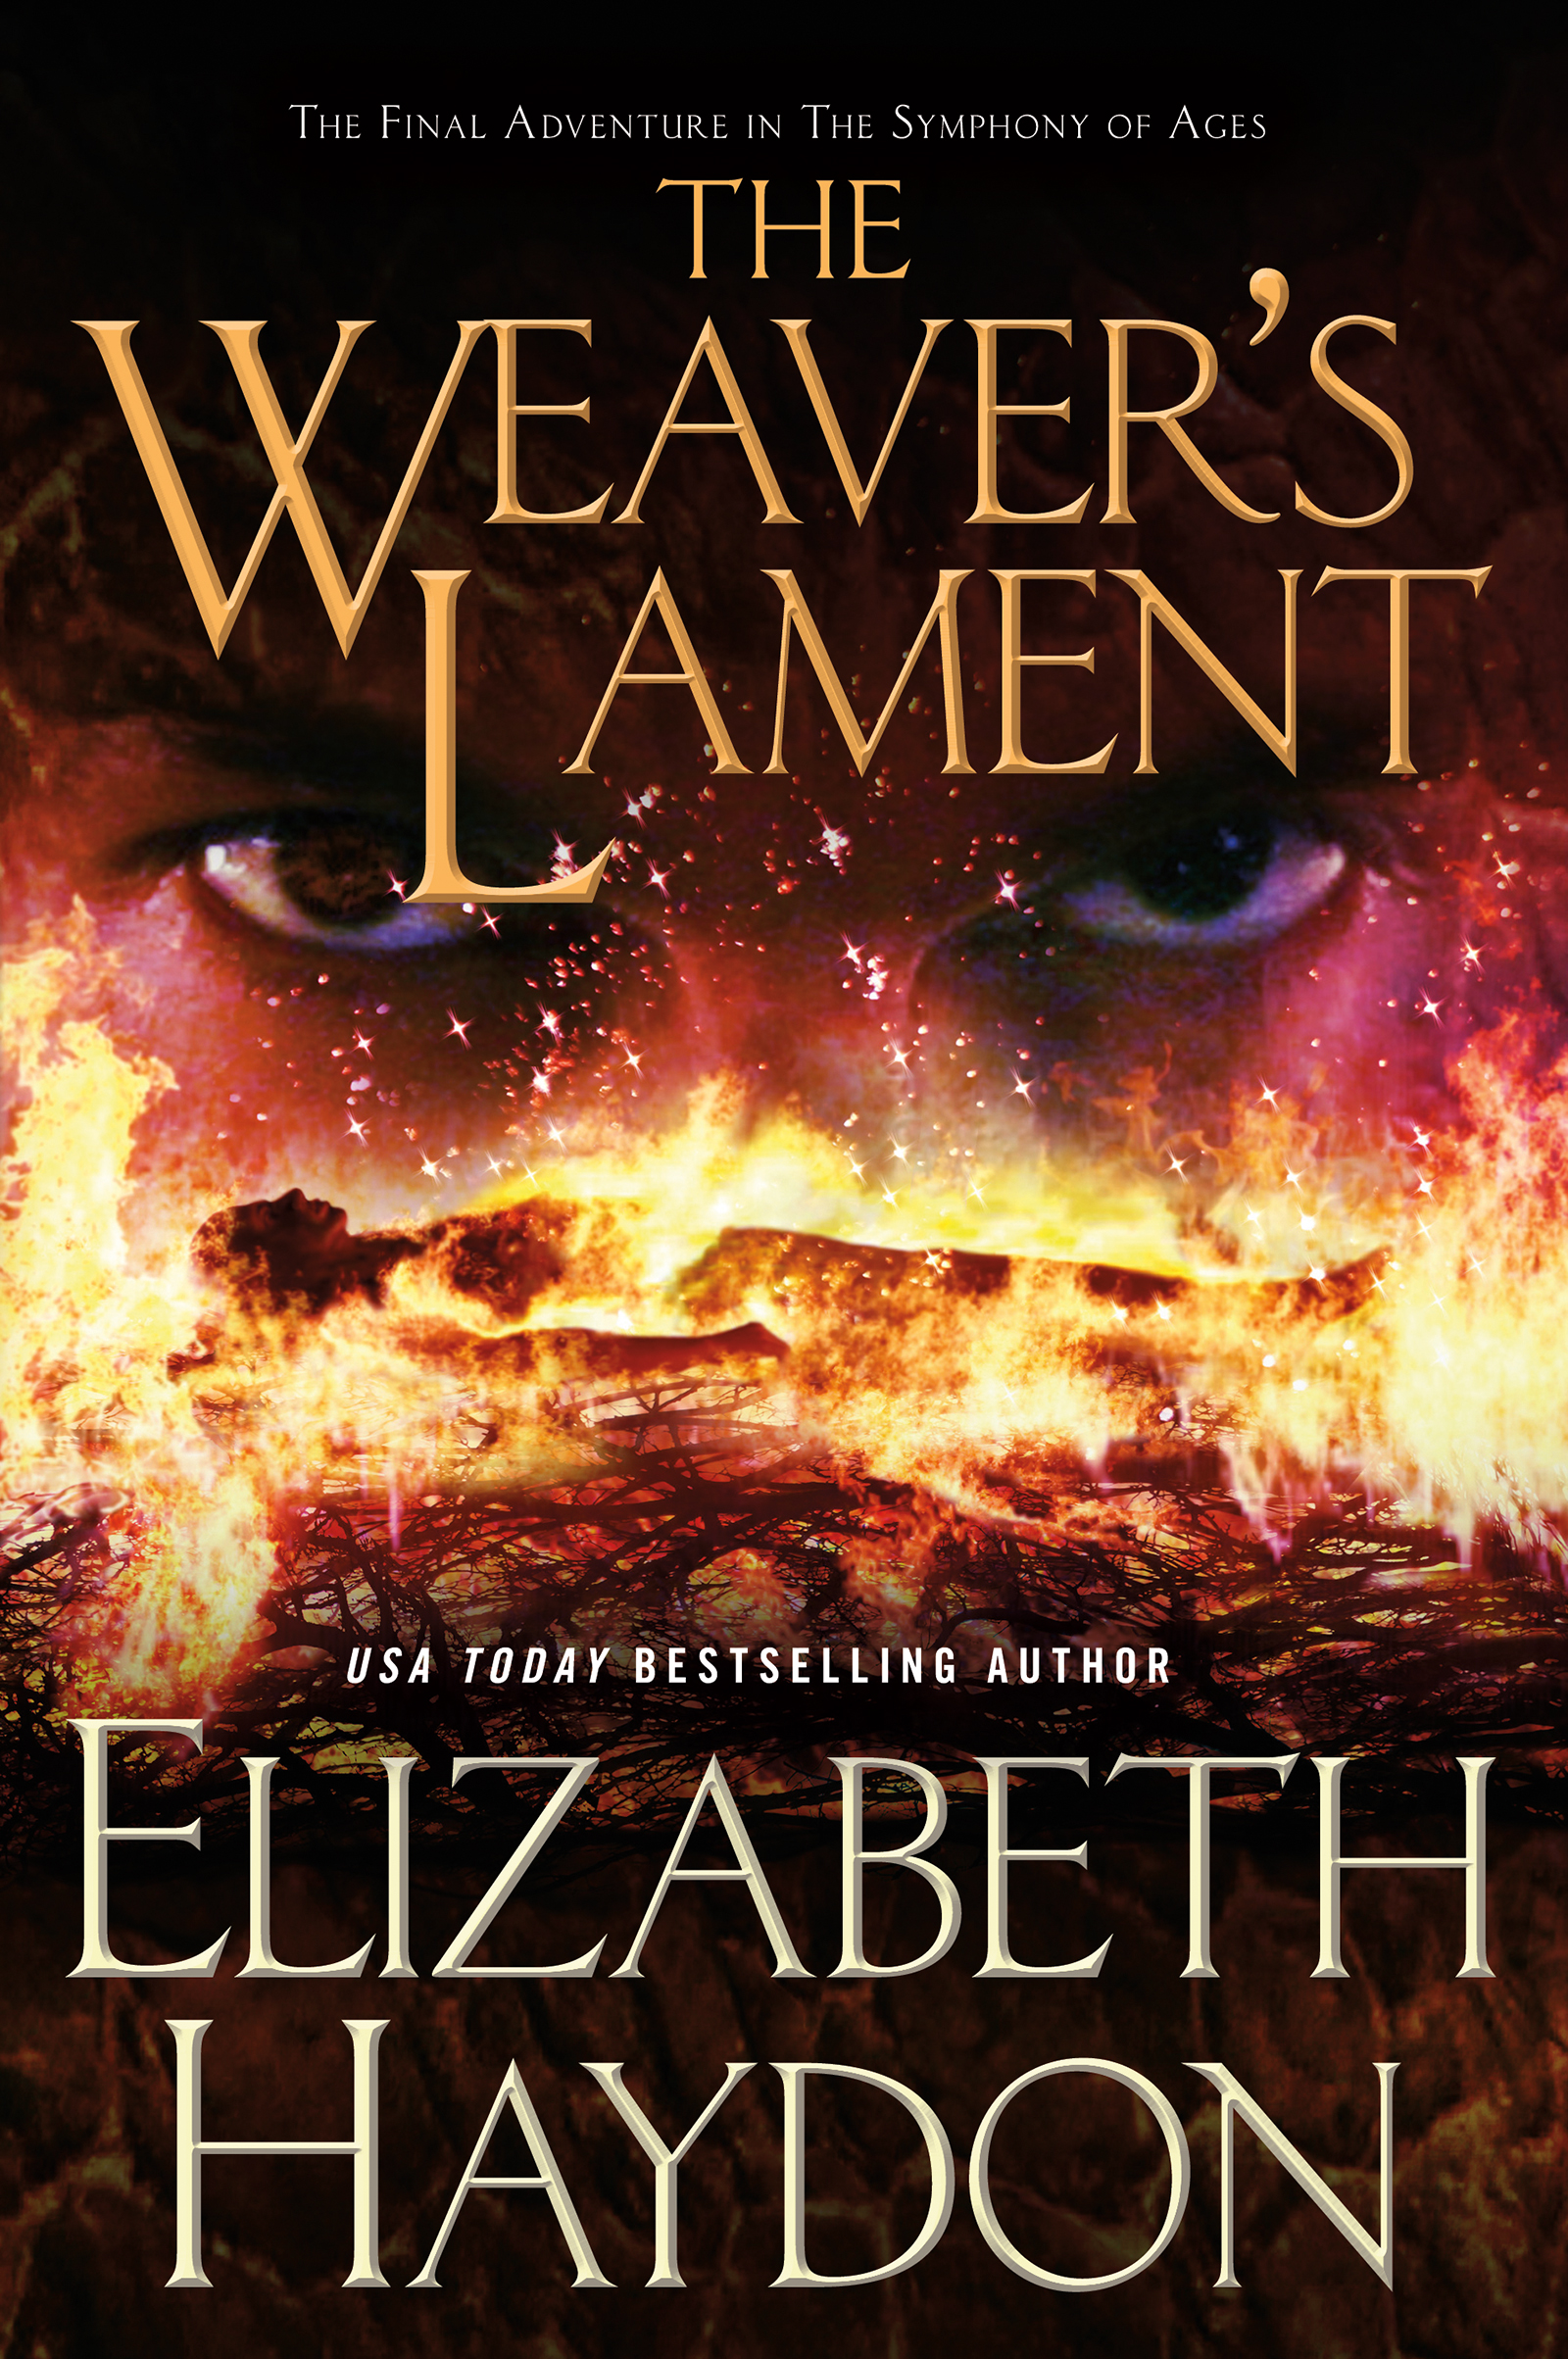 The Weaver's Lament : The Final Adventure in The Symphony of Ages by Elizabeth Haydon